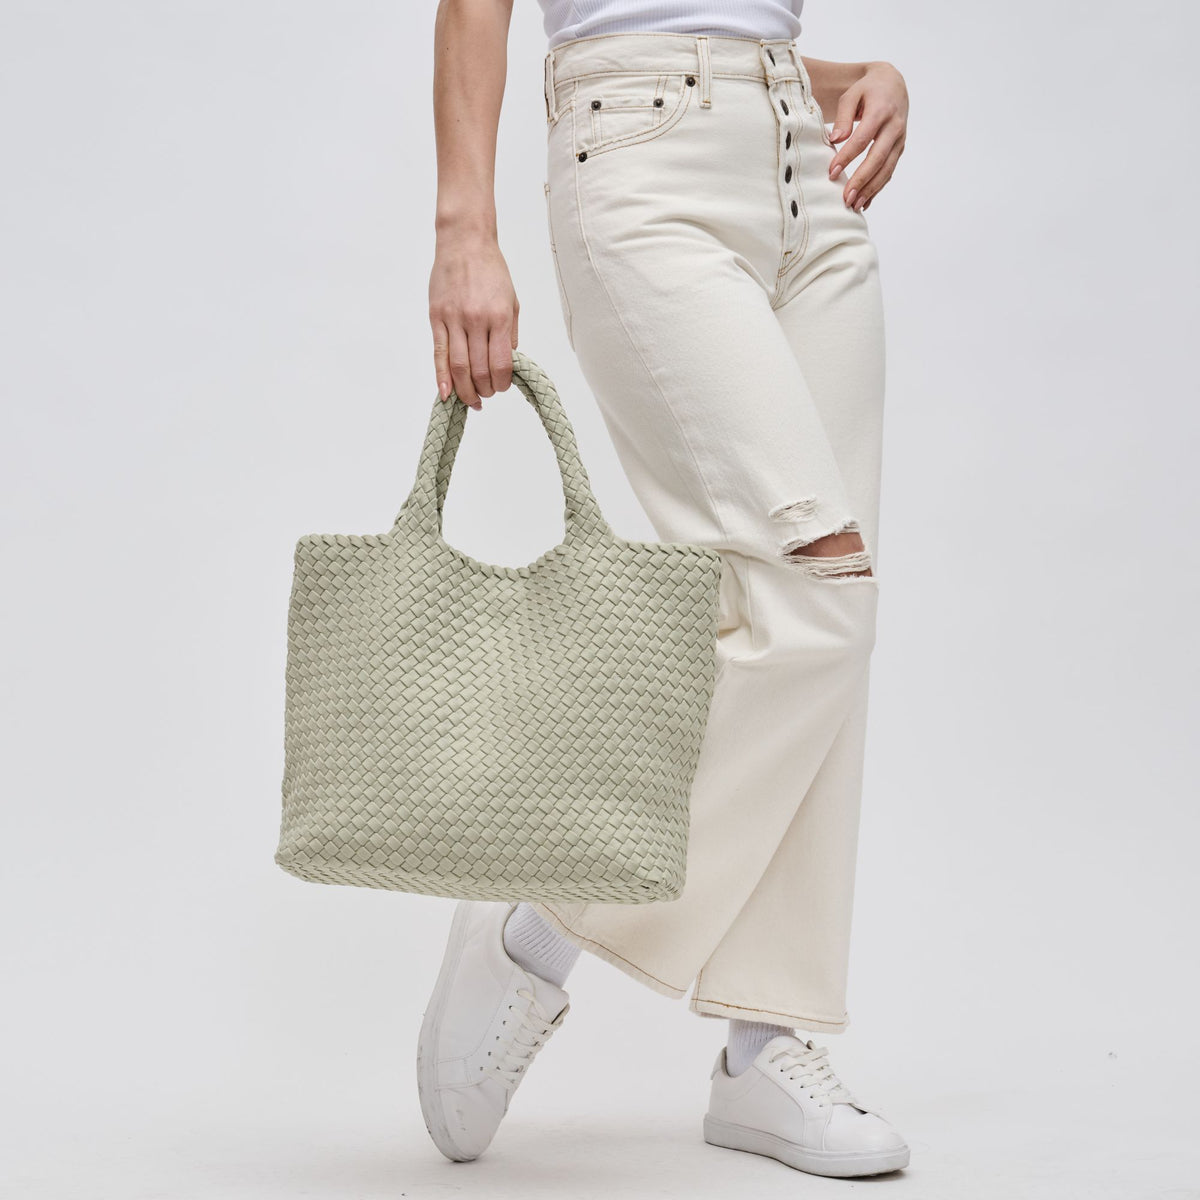 Woman wearing Sage Sol and Selene Sky's The Limit - Medium Tote 841764108867 View 4 | Sage